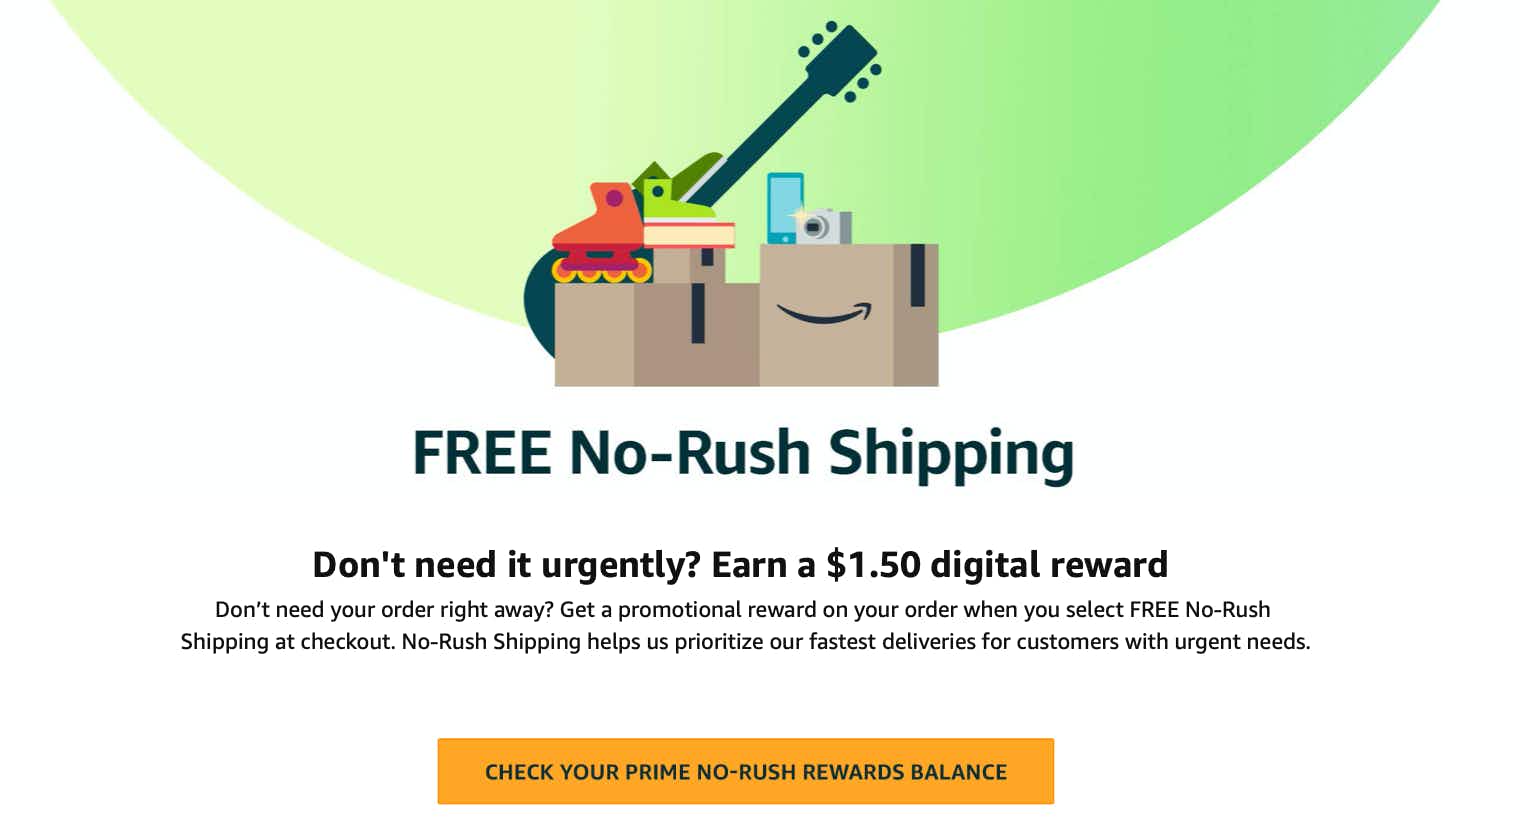 How Many  Prime No-Rush Rewards Shipping Credits Do YOU Have?